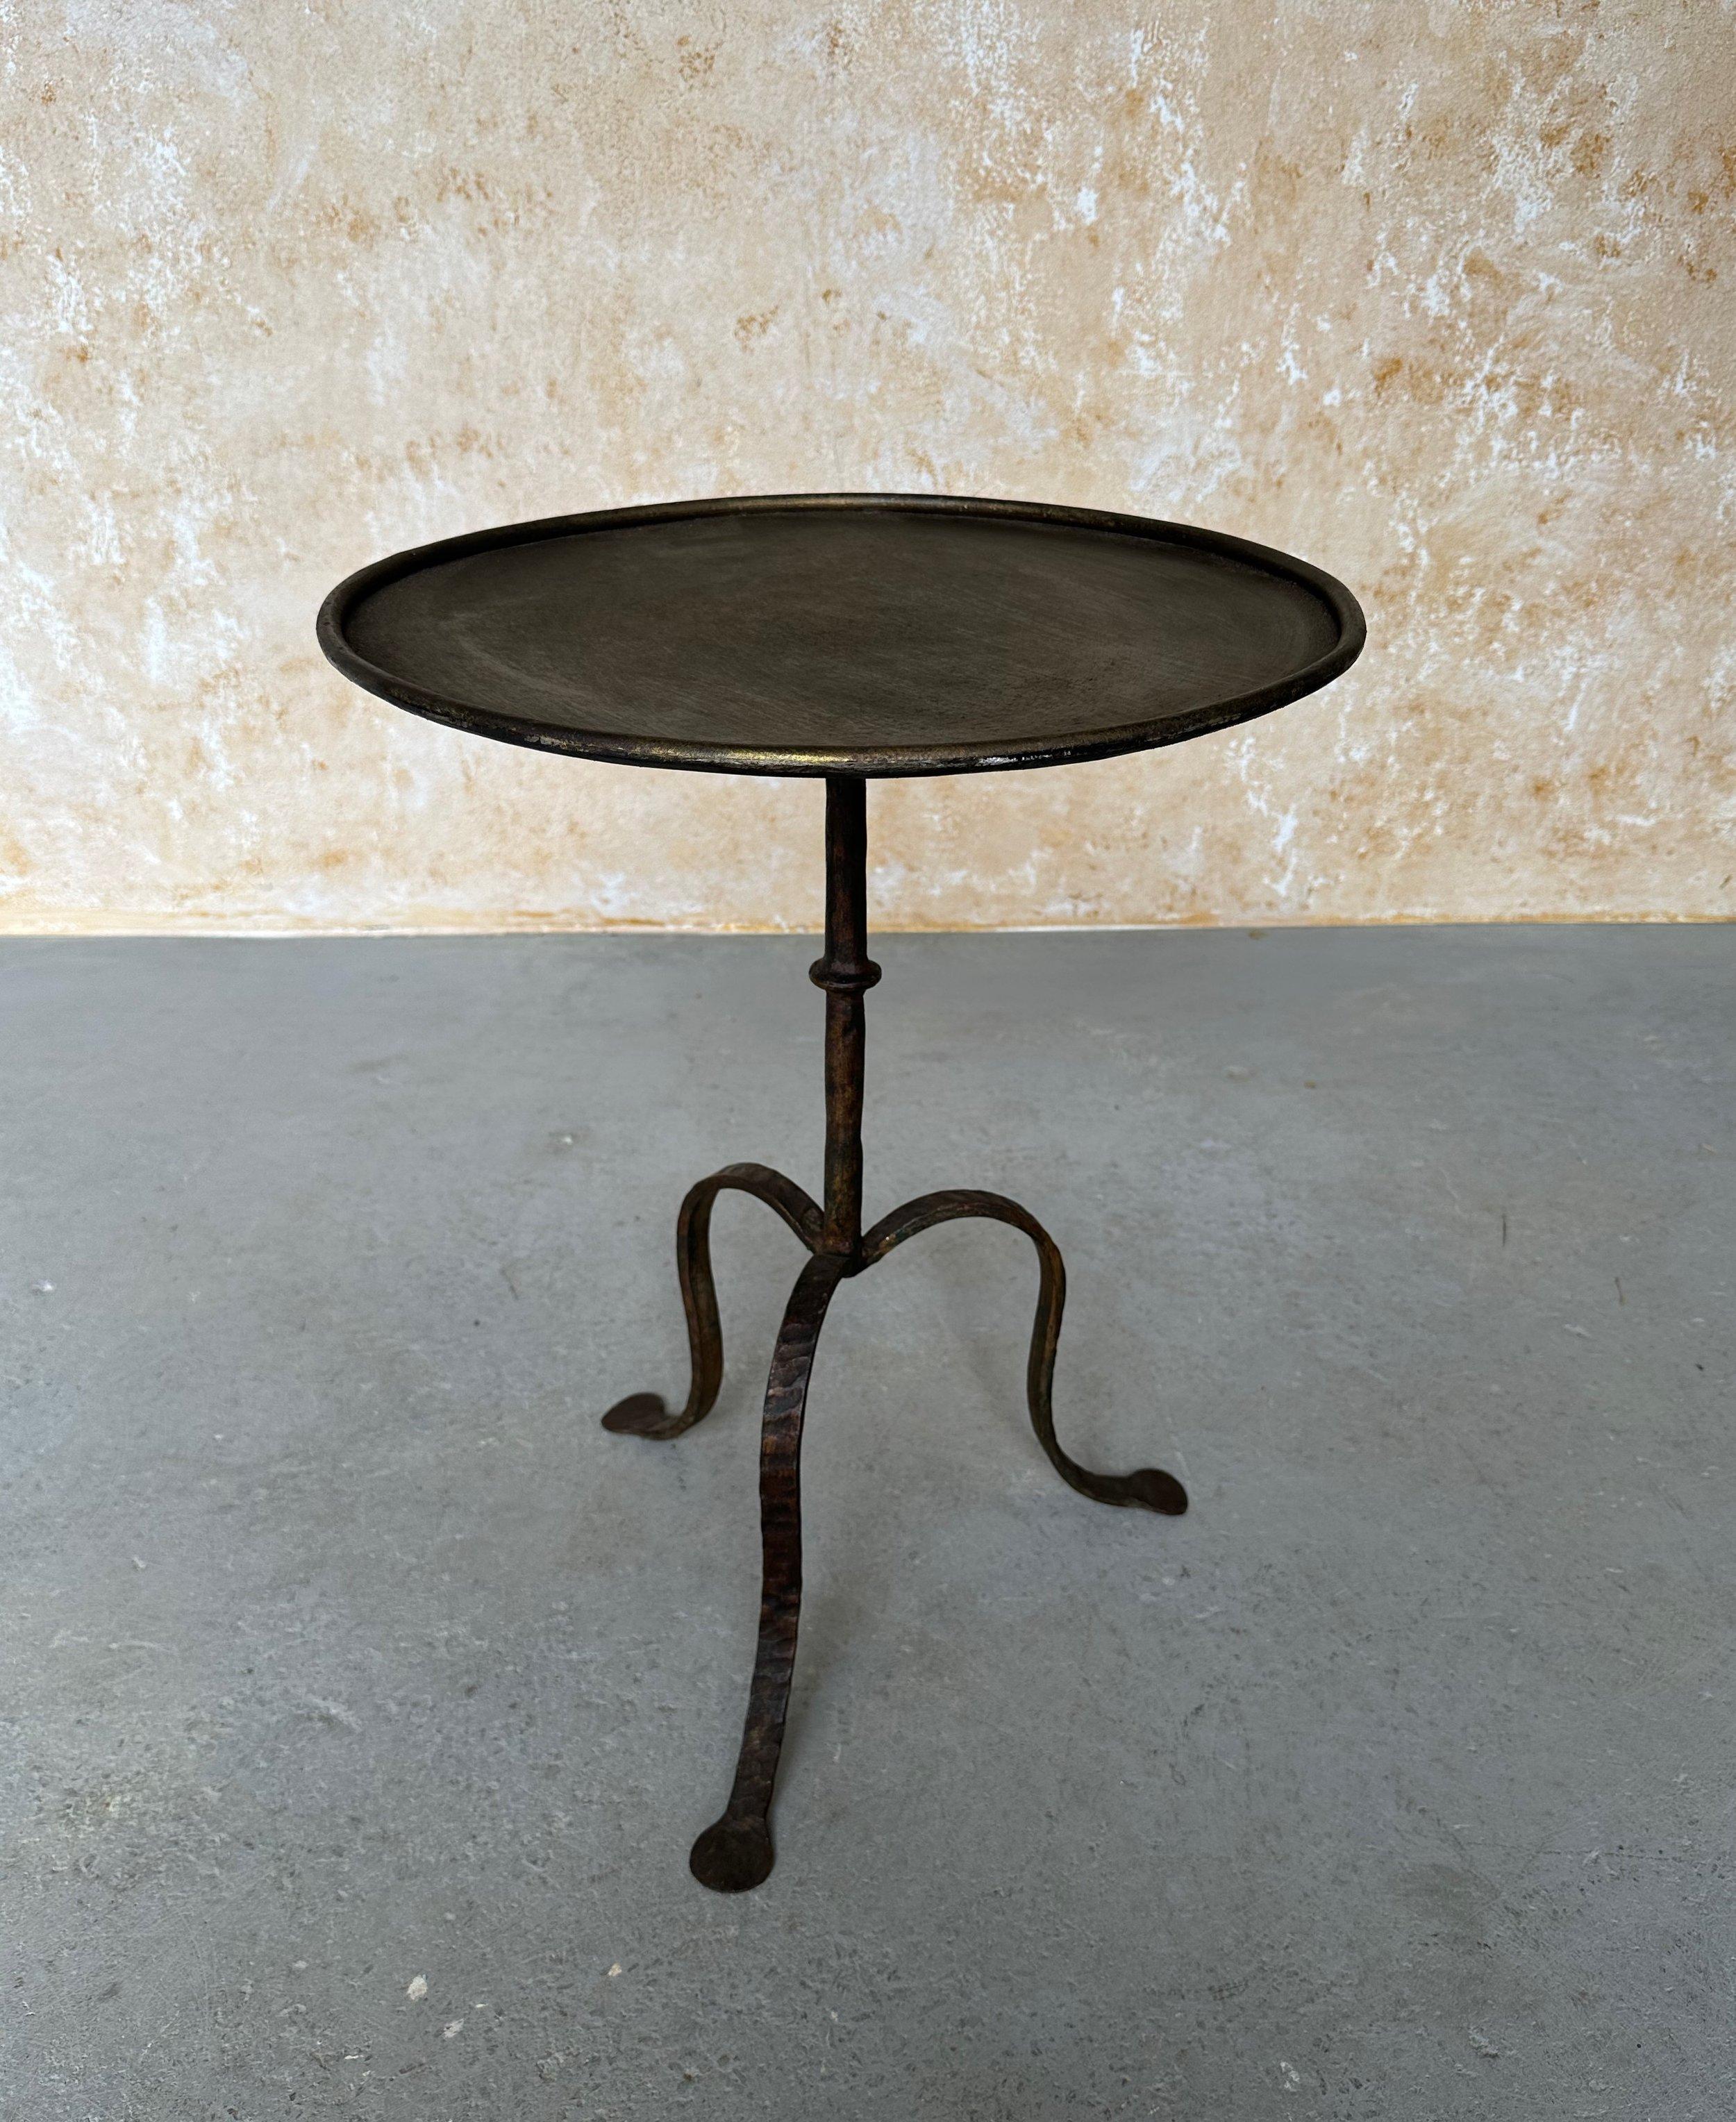 Mid-20th Century Vintage Spanish Iron Drinks Table with Curved Legs